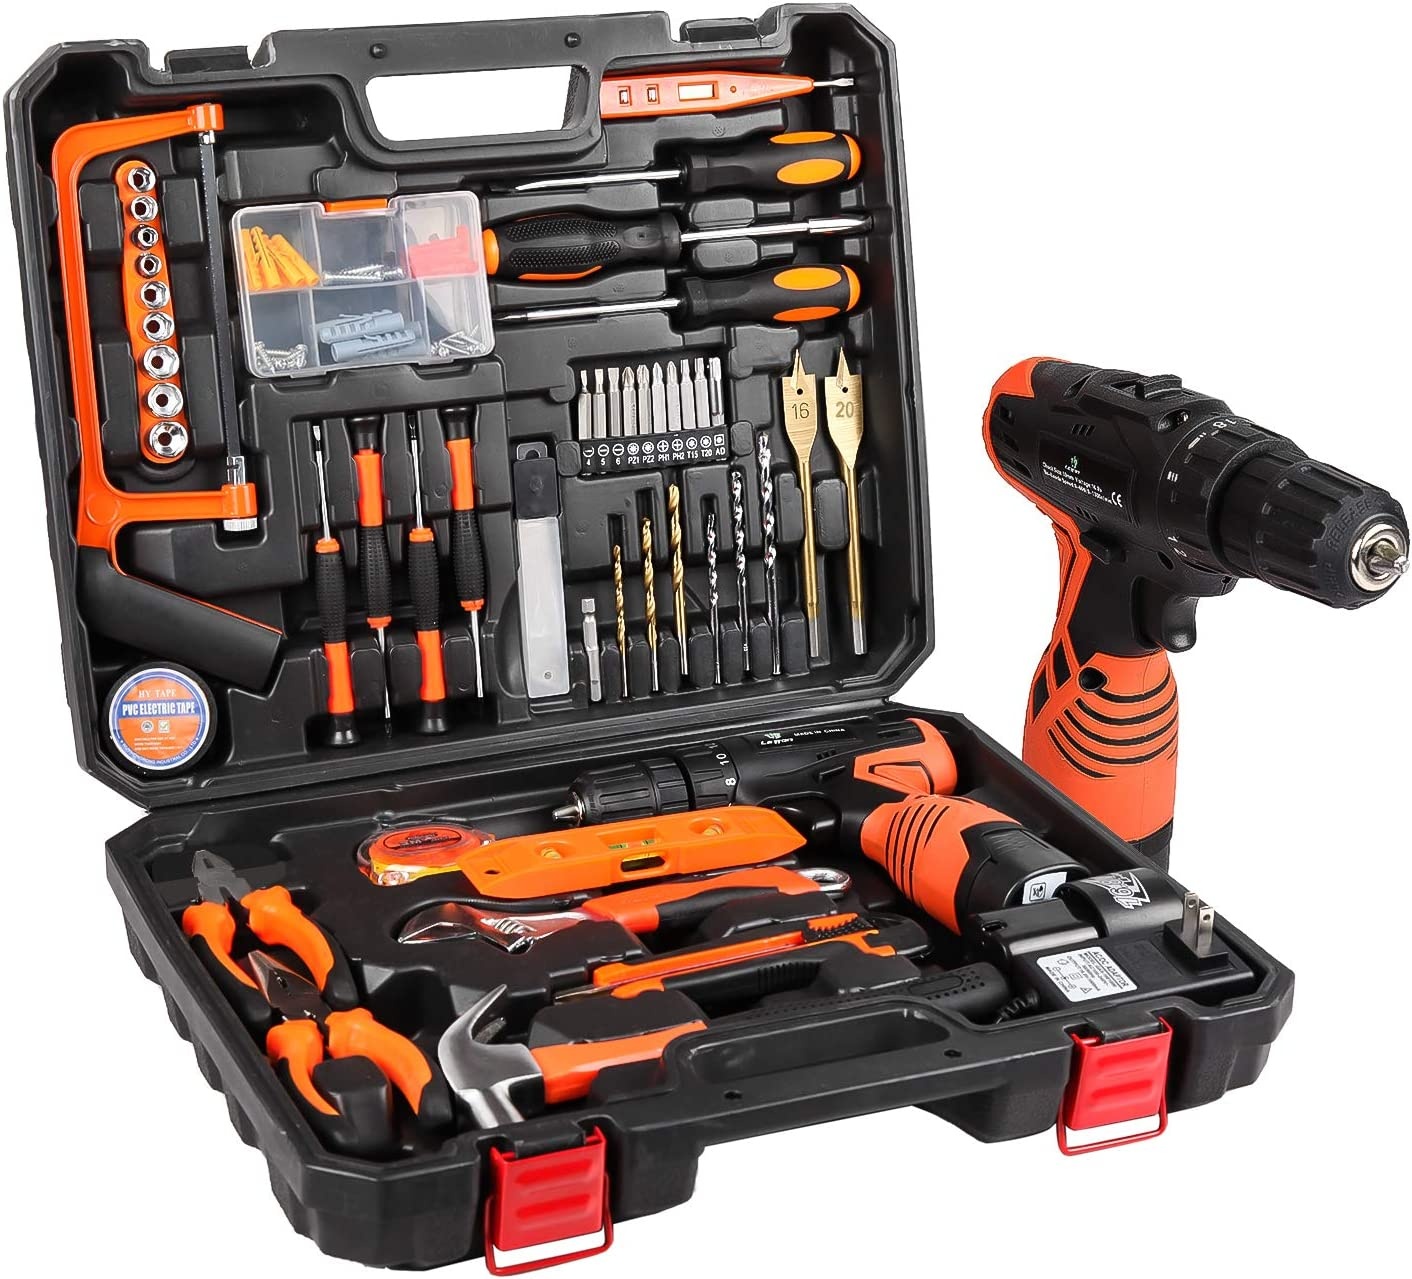 16.8V Tool Kit with Drill, 247 In-Lb Torque, 0-1300RMP Variable Speed, 10MM 3/8'' Keyless Chuck, 18+1 Clutch, 1.3Ah Li-Ion Battery & Charger for Home Tool Kit